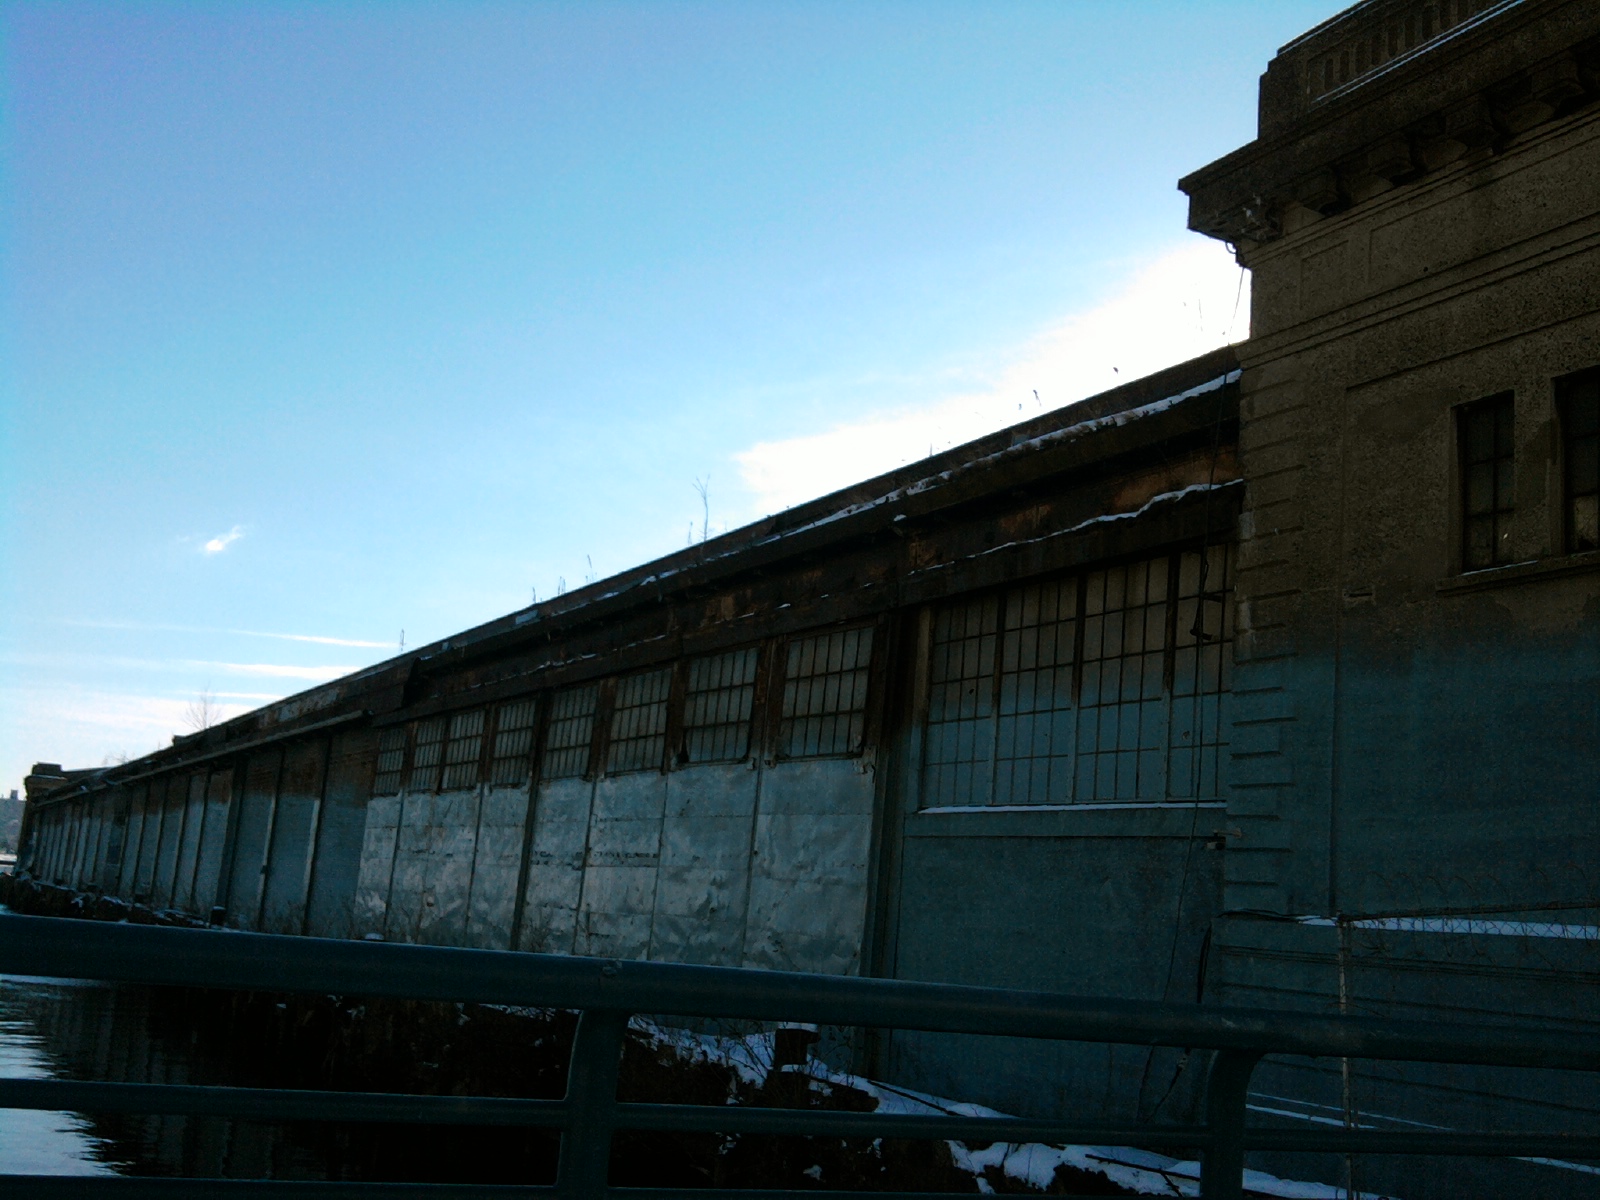 Pier 9, before recent roof and window improvements, from Race Street Pier